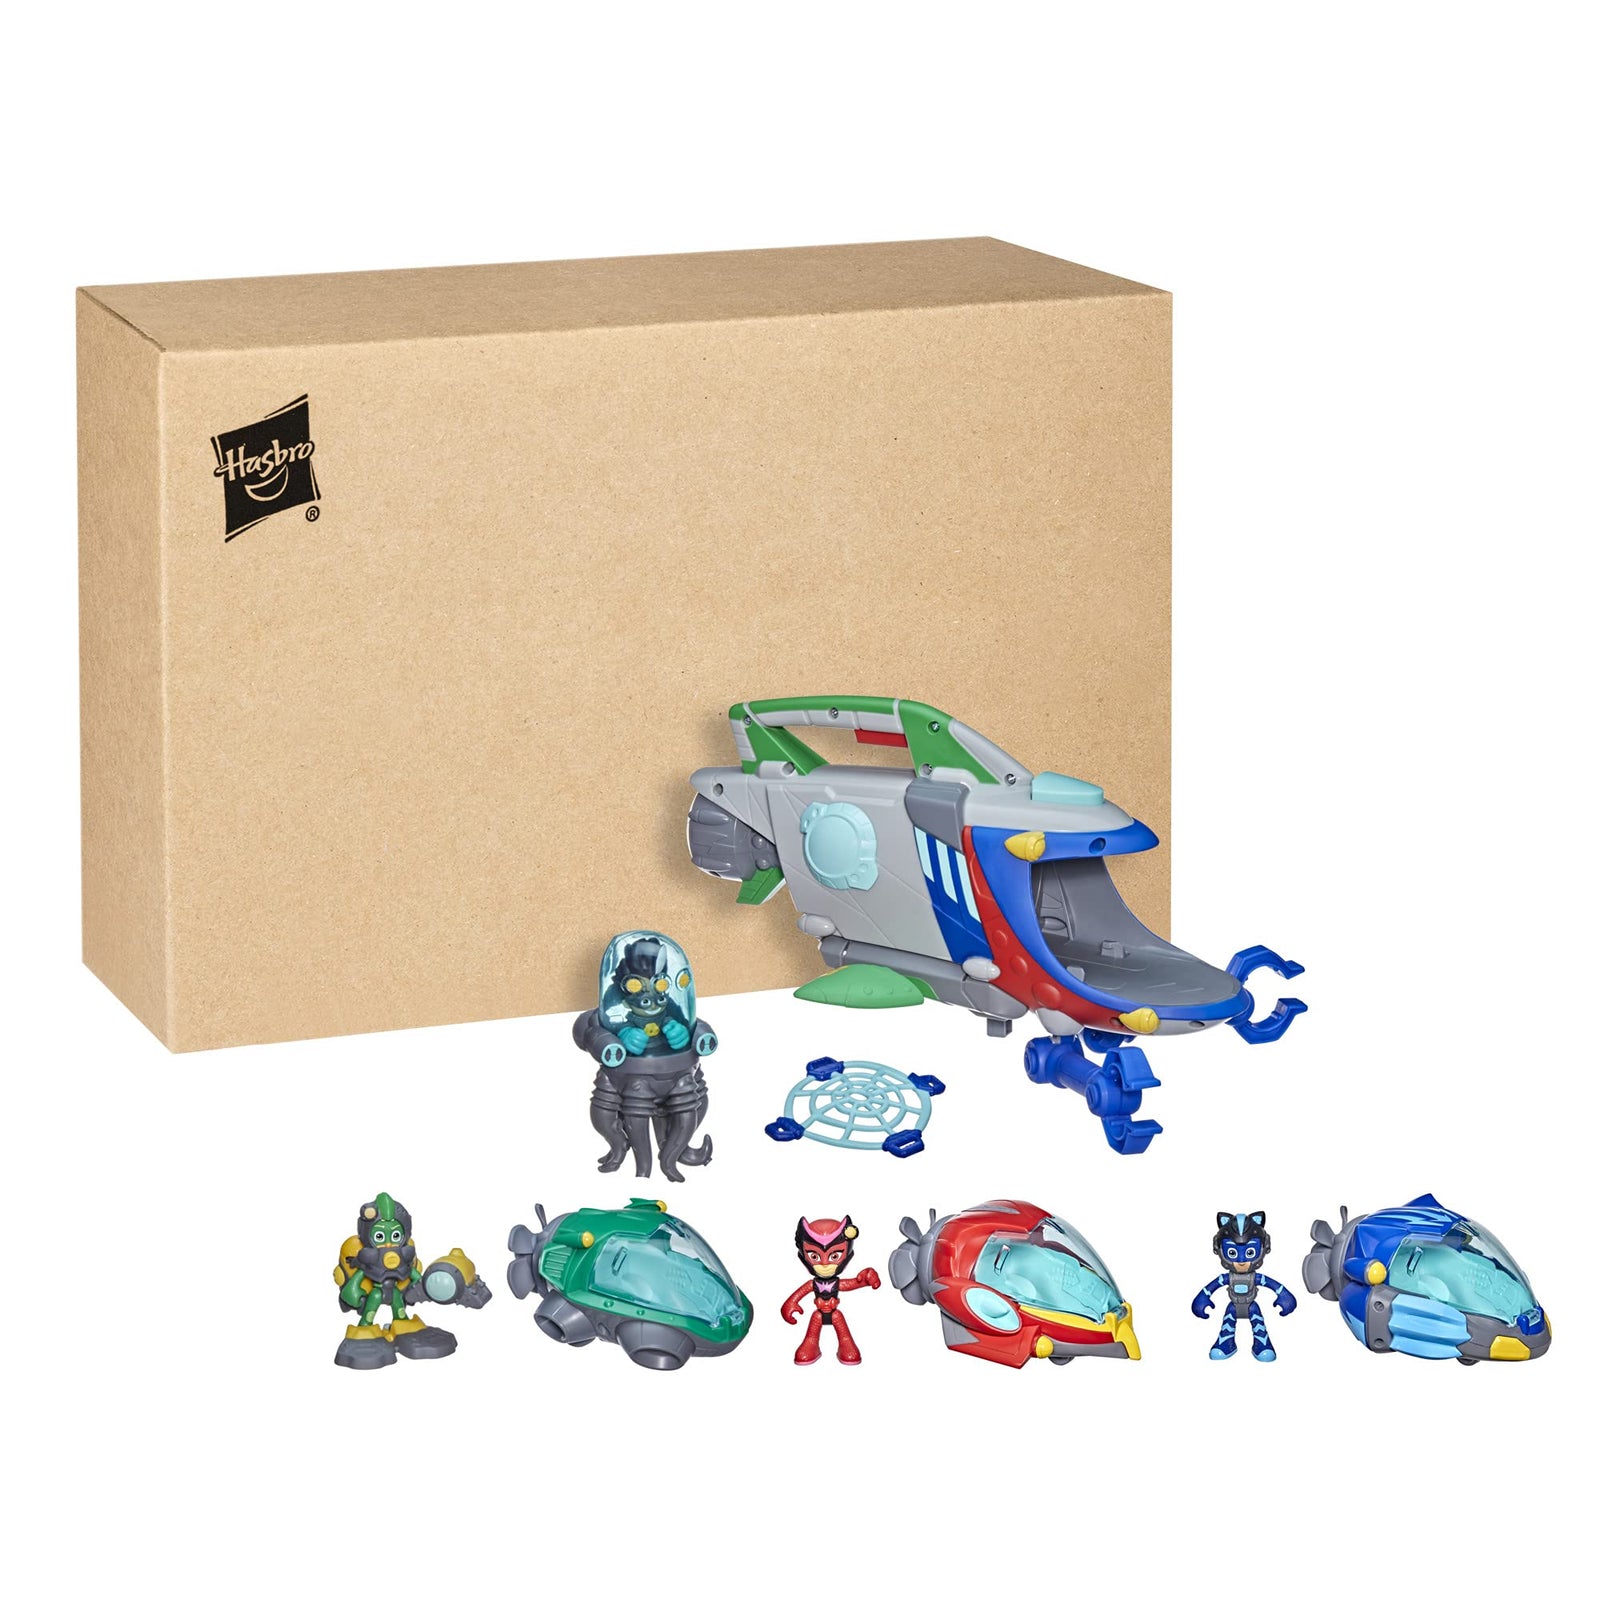 PJ Masks PJ Launching Submarine and Rovers Preschool Toy, Underwater-Themed Playset with 3 PJ Rovers and 3 Action Figures, Ages 3 and Up (Amazon Exclusive)